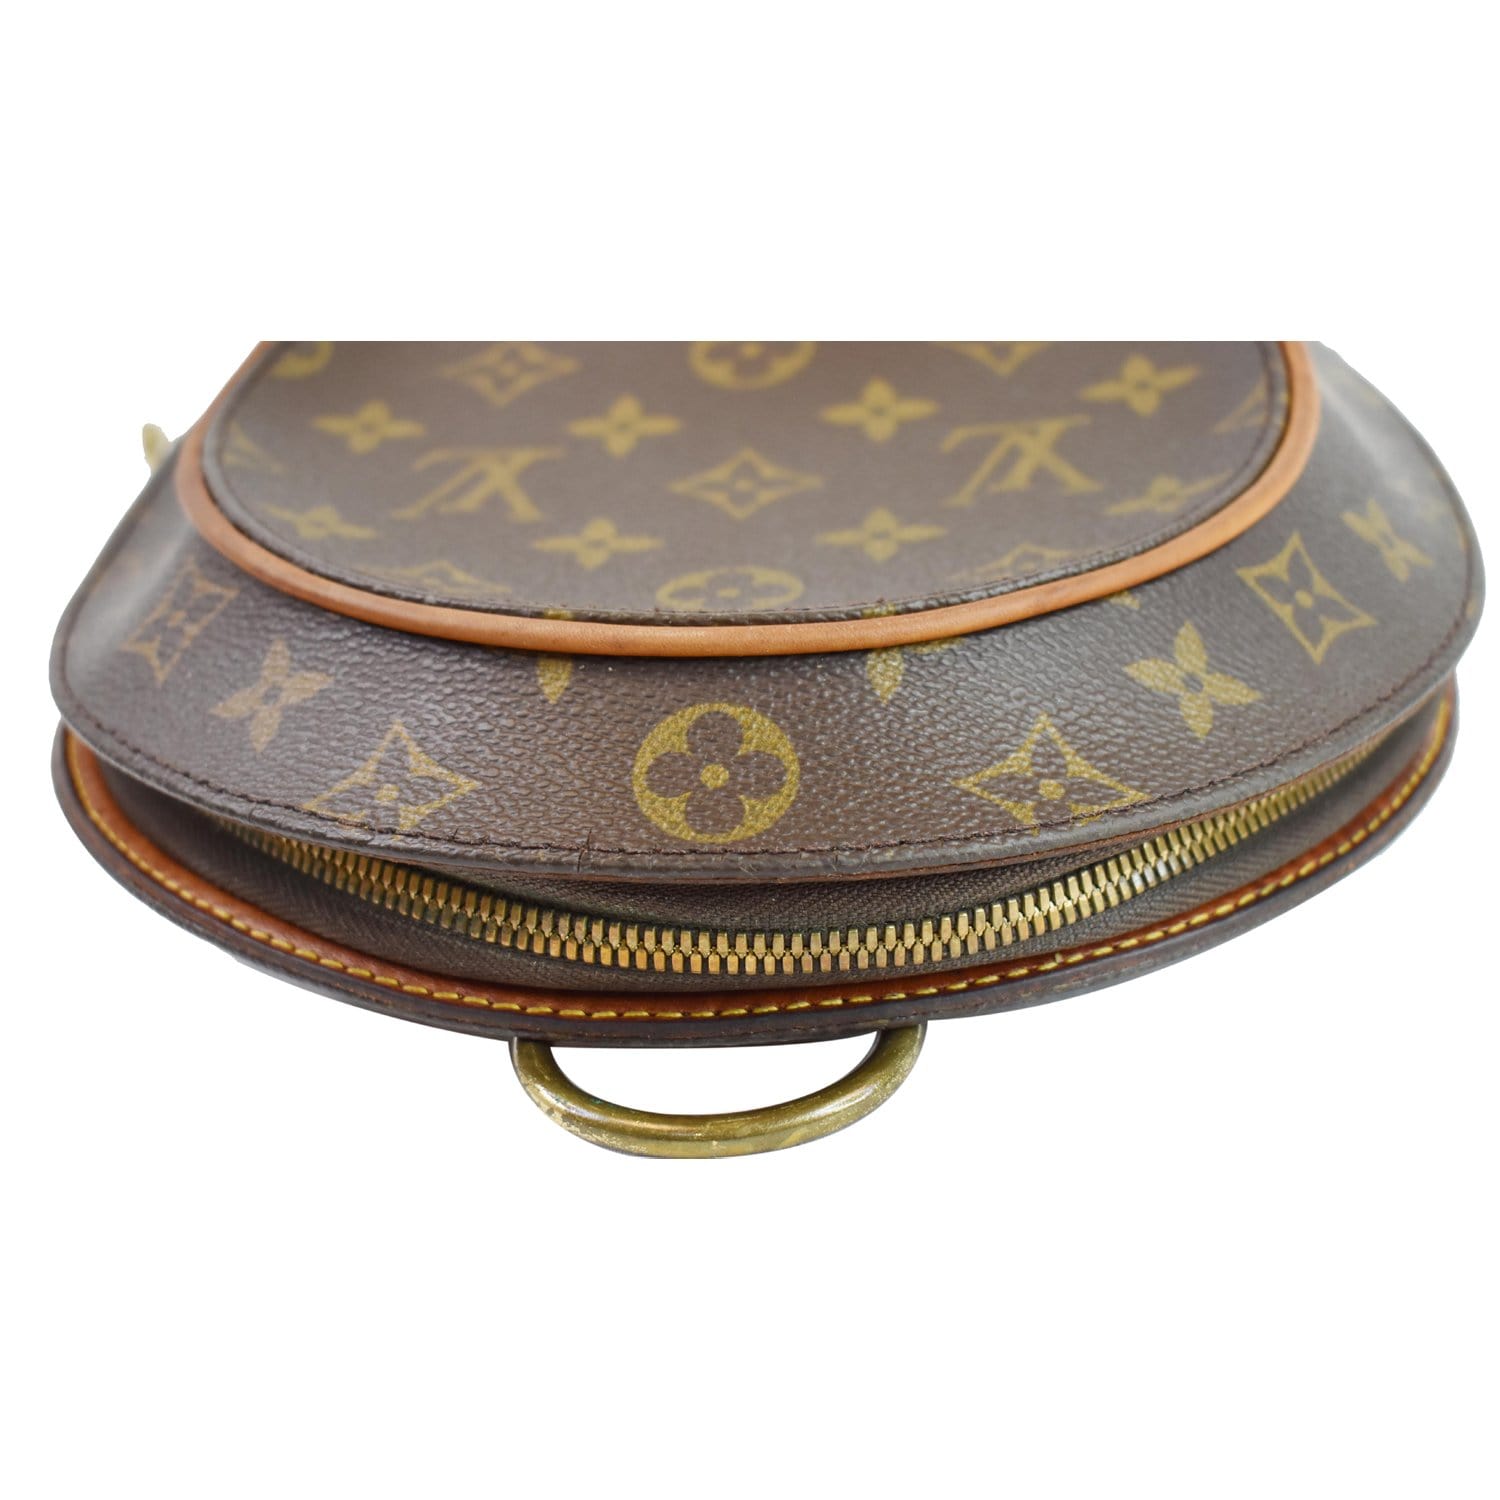 Our bag of the day choir is the Louis Vuitton Ellipse. Chose this beca